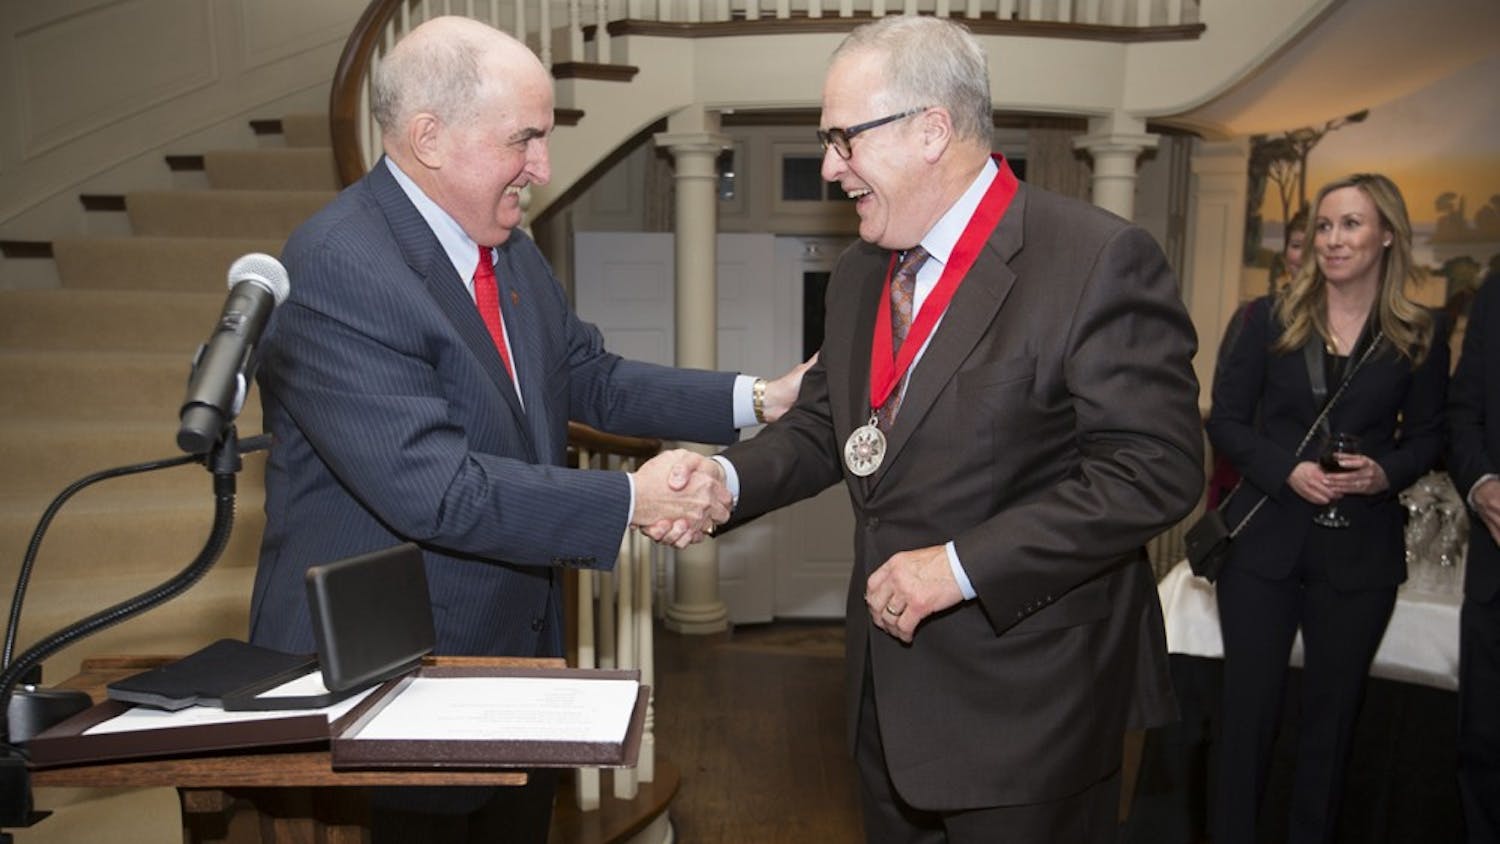 IU President Michael McRobbie awards the President's Medal for Excellence to John Lechleiter. The award is the highest honor an IU president can award and is given to recognize exceptional distinction in public service.